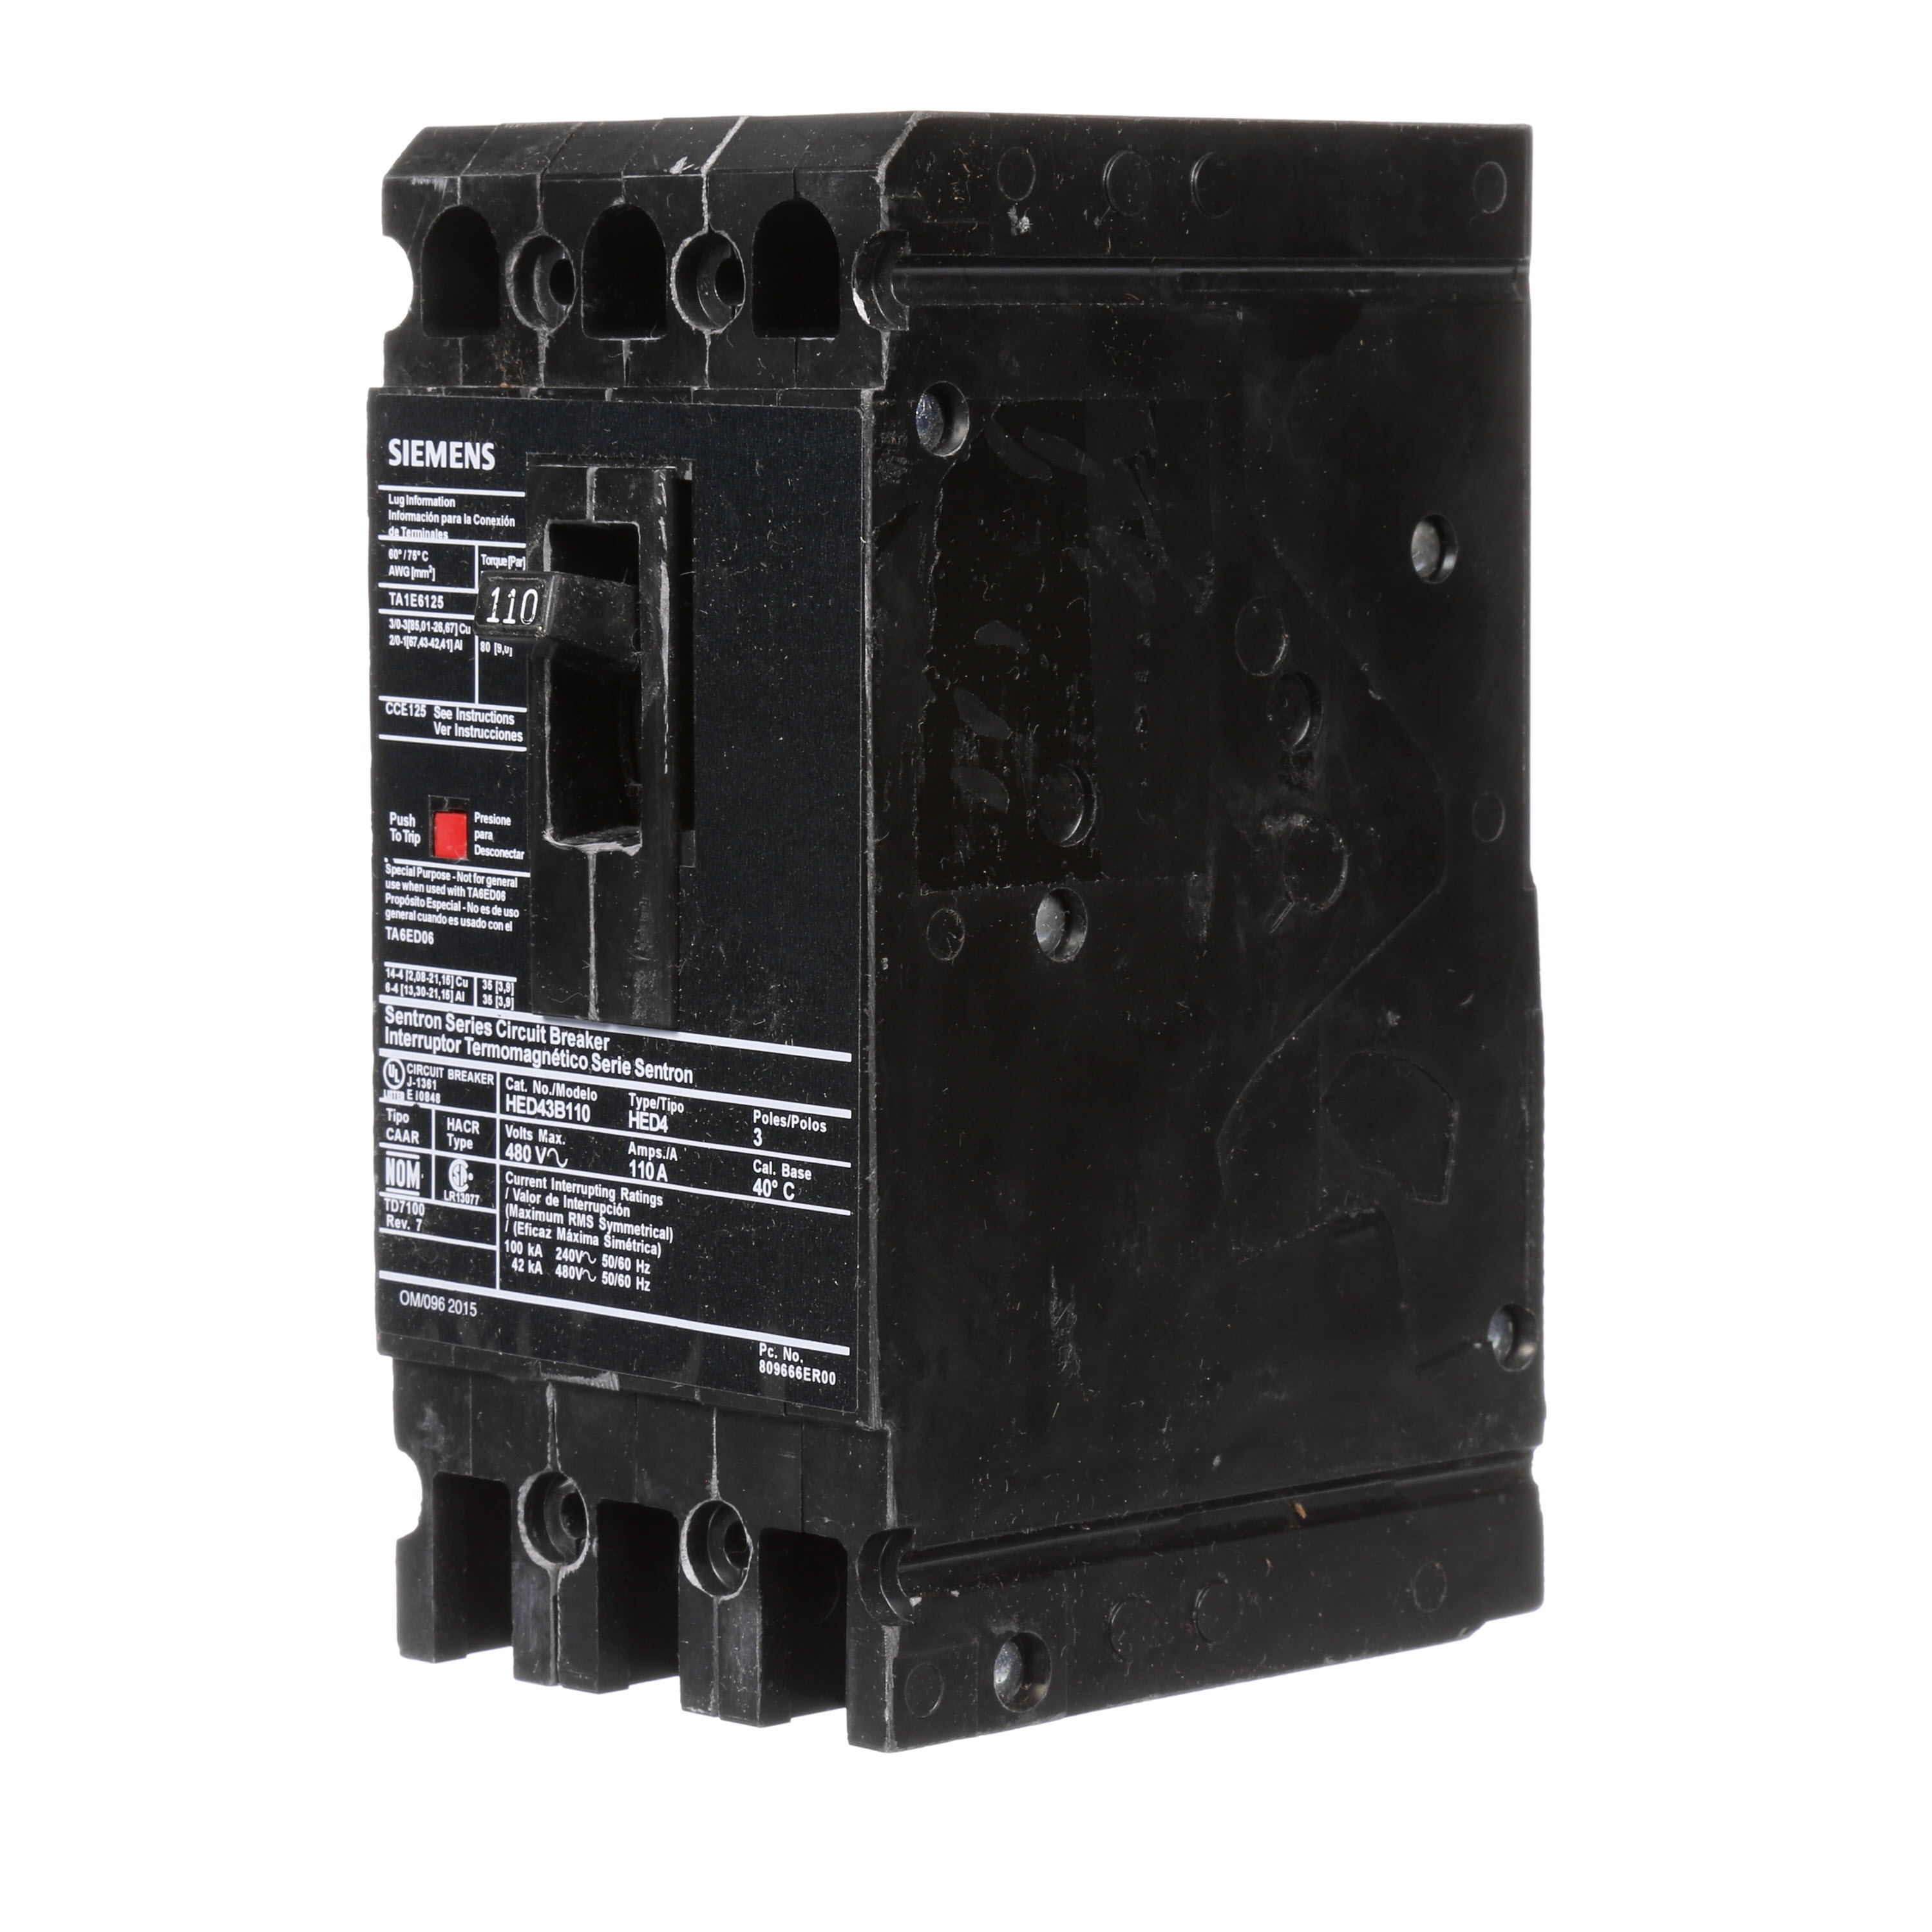 SIEMENS LOW VOLTAGE SENTRON MOLDED CASE CIRCUIT BREAKER WITH THERMAL - MAGNETICTRIP UNIT. STANDARD 40 DEG C BREAKER ED FRAME WITH HIGH BREAKING CAPACITY. 110A3-POLE (42KAIC AT 480V). NON-INTERCHANGEABLE TRIP UNIT. SPECIAL FEATURES LOAD LUGS ONLY (TA1E6125) WIRE RANGE 3 - 3/0AWG (CU) / 1 - 2/0AWG (AL). DIMENSIONS (W x H x D) IN 3.00 x 6.4 x 3.92.